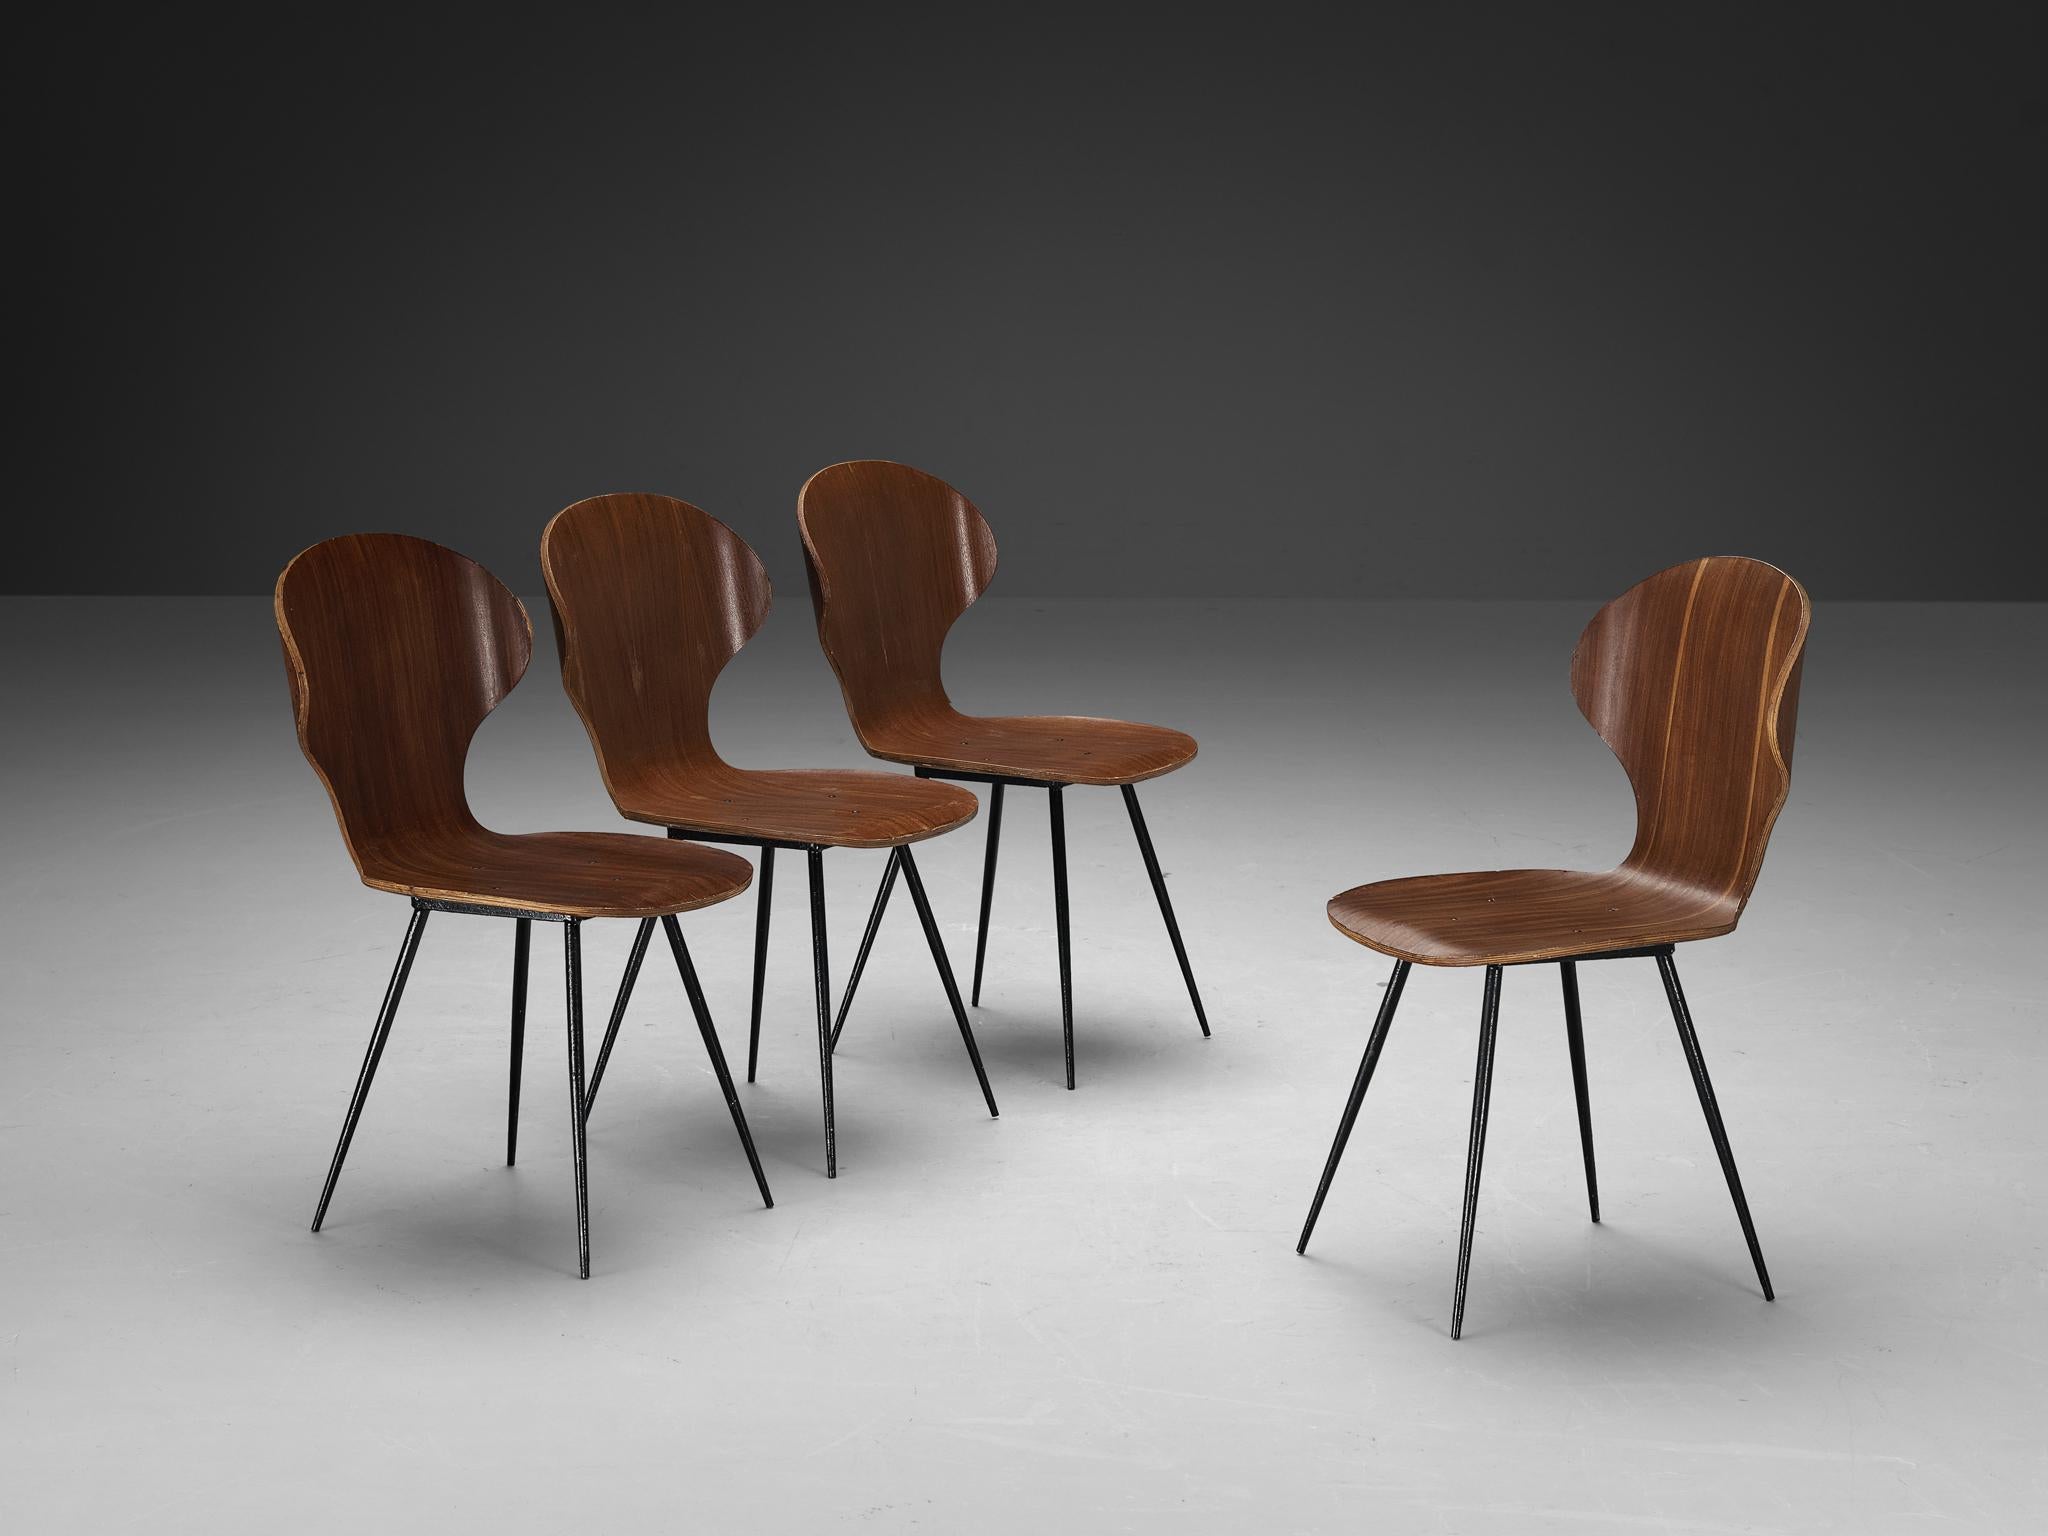 Carlo Ratti for Industria Legni Curvati, set of four dining chairs, plywood with a teak fineer and metal, Italy, 1970s.

Elegant set of Italian dining chairs with metal frame and plywood seats. The seat features a wingback with remarkable curves.